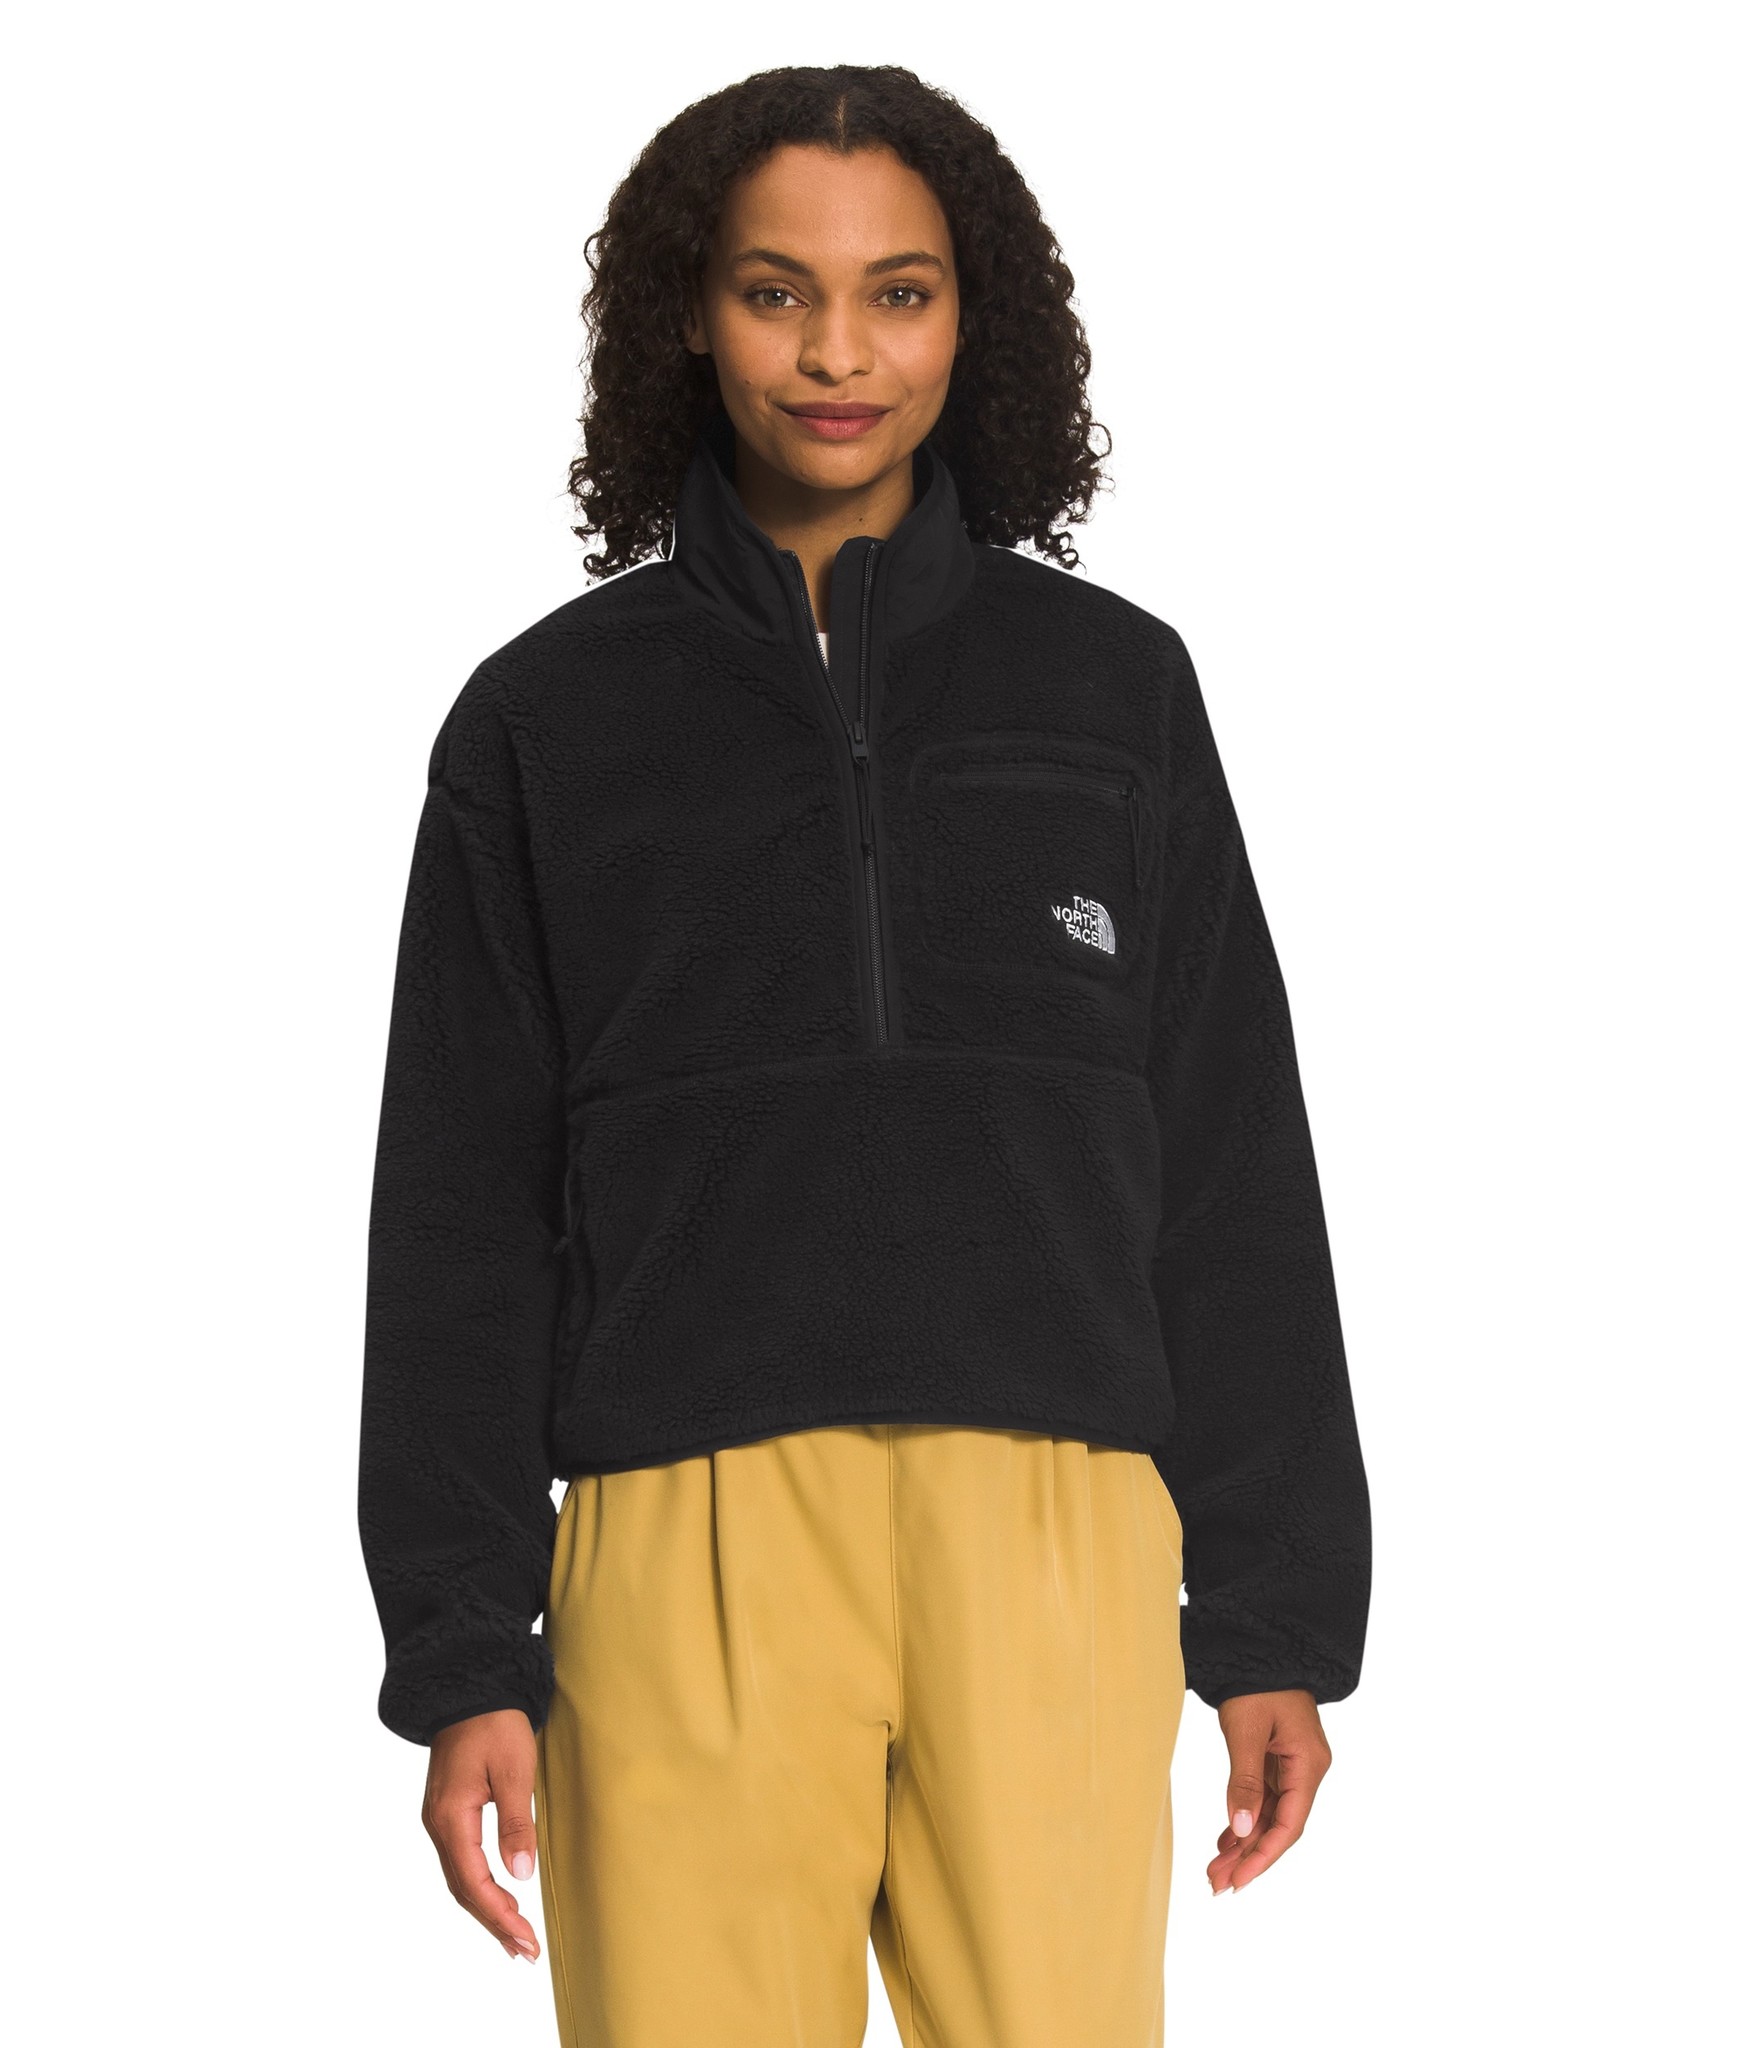 Women's Isobar Pullover - Bayleaf | Stoney Creek Hunting Gear